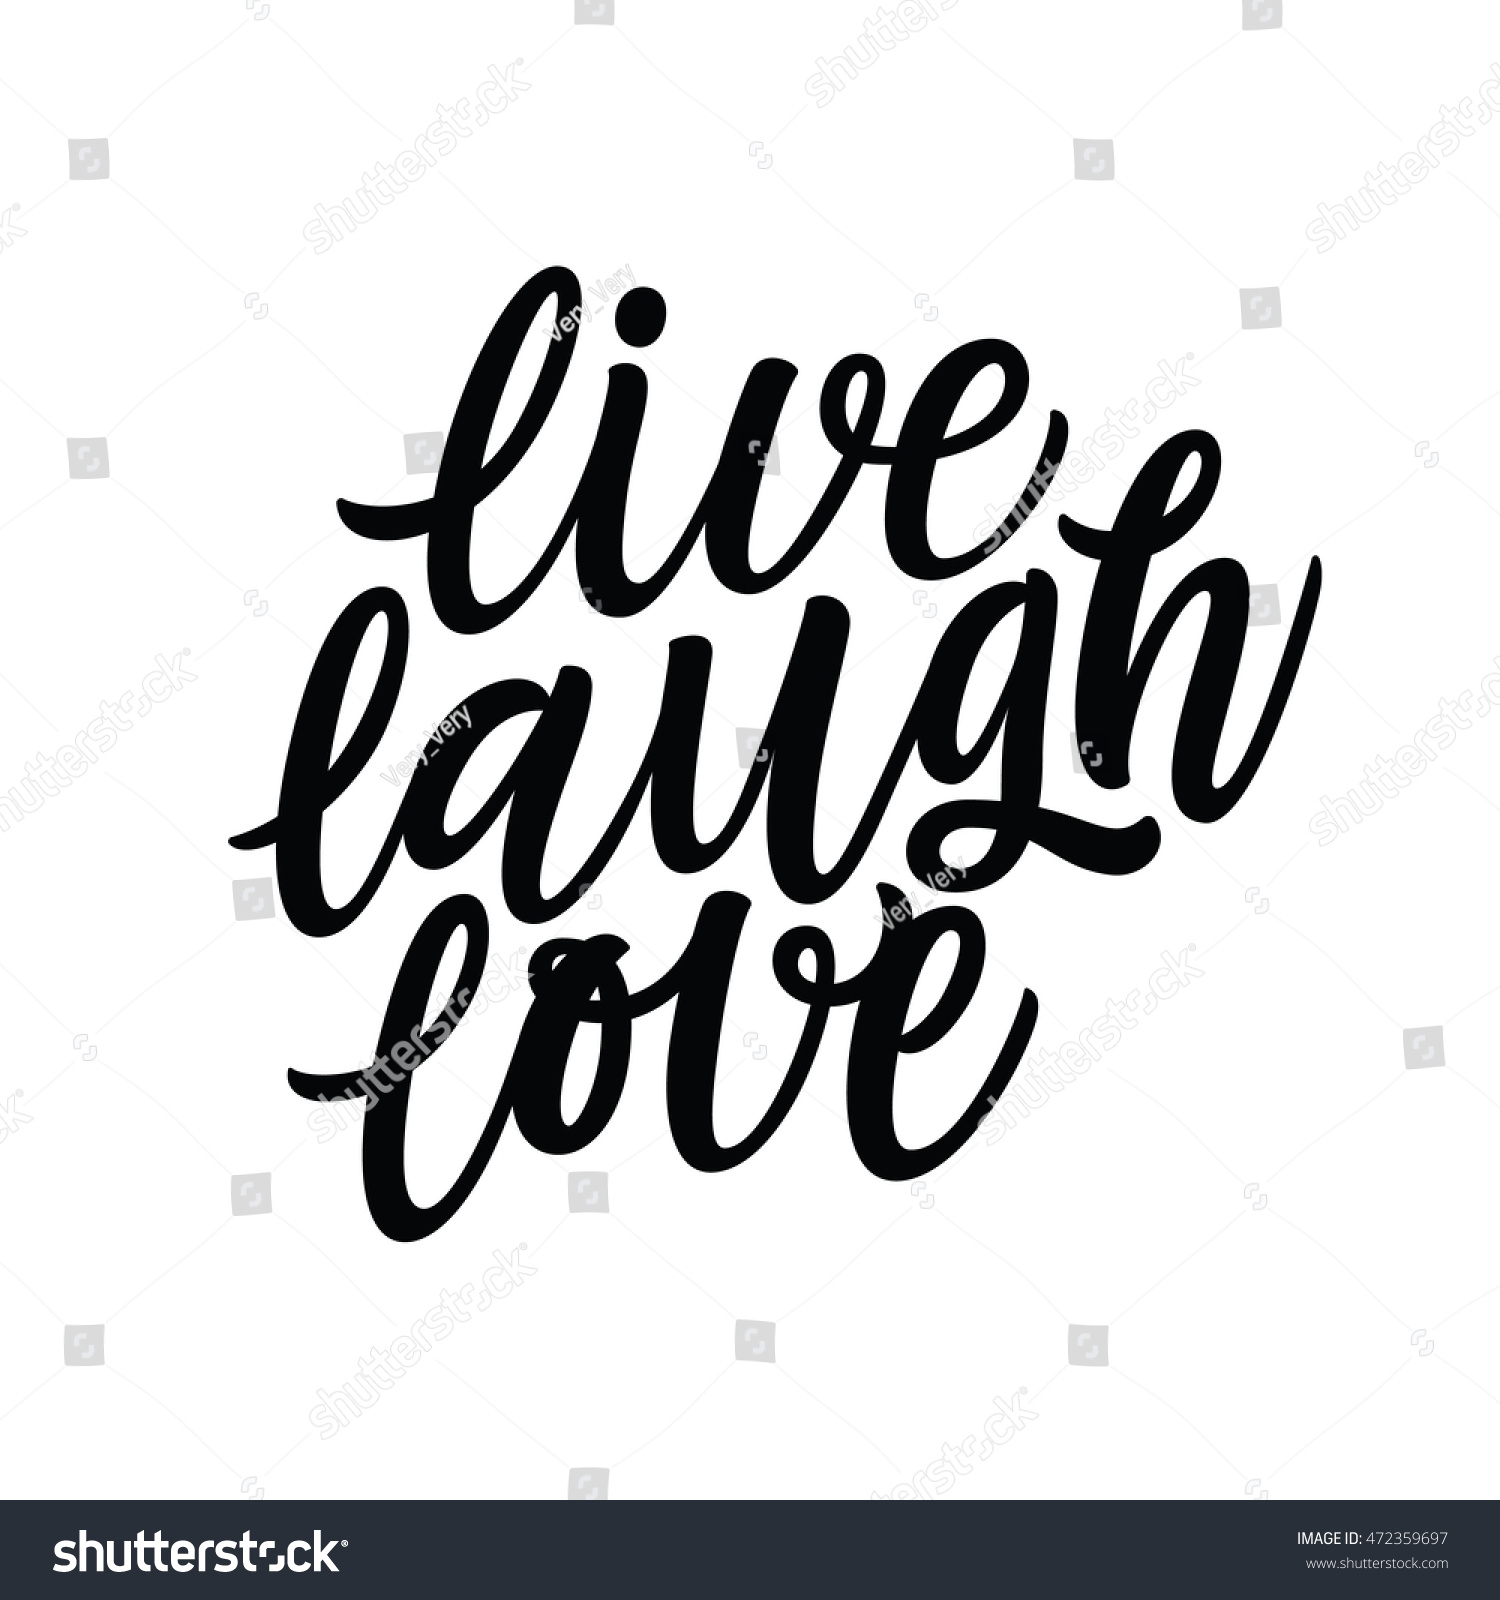 Live Laugh Love Positive quote handwritten with brush typography Inspirational and motivational phrase